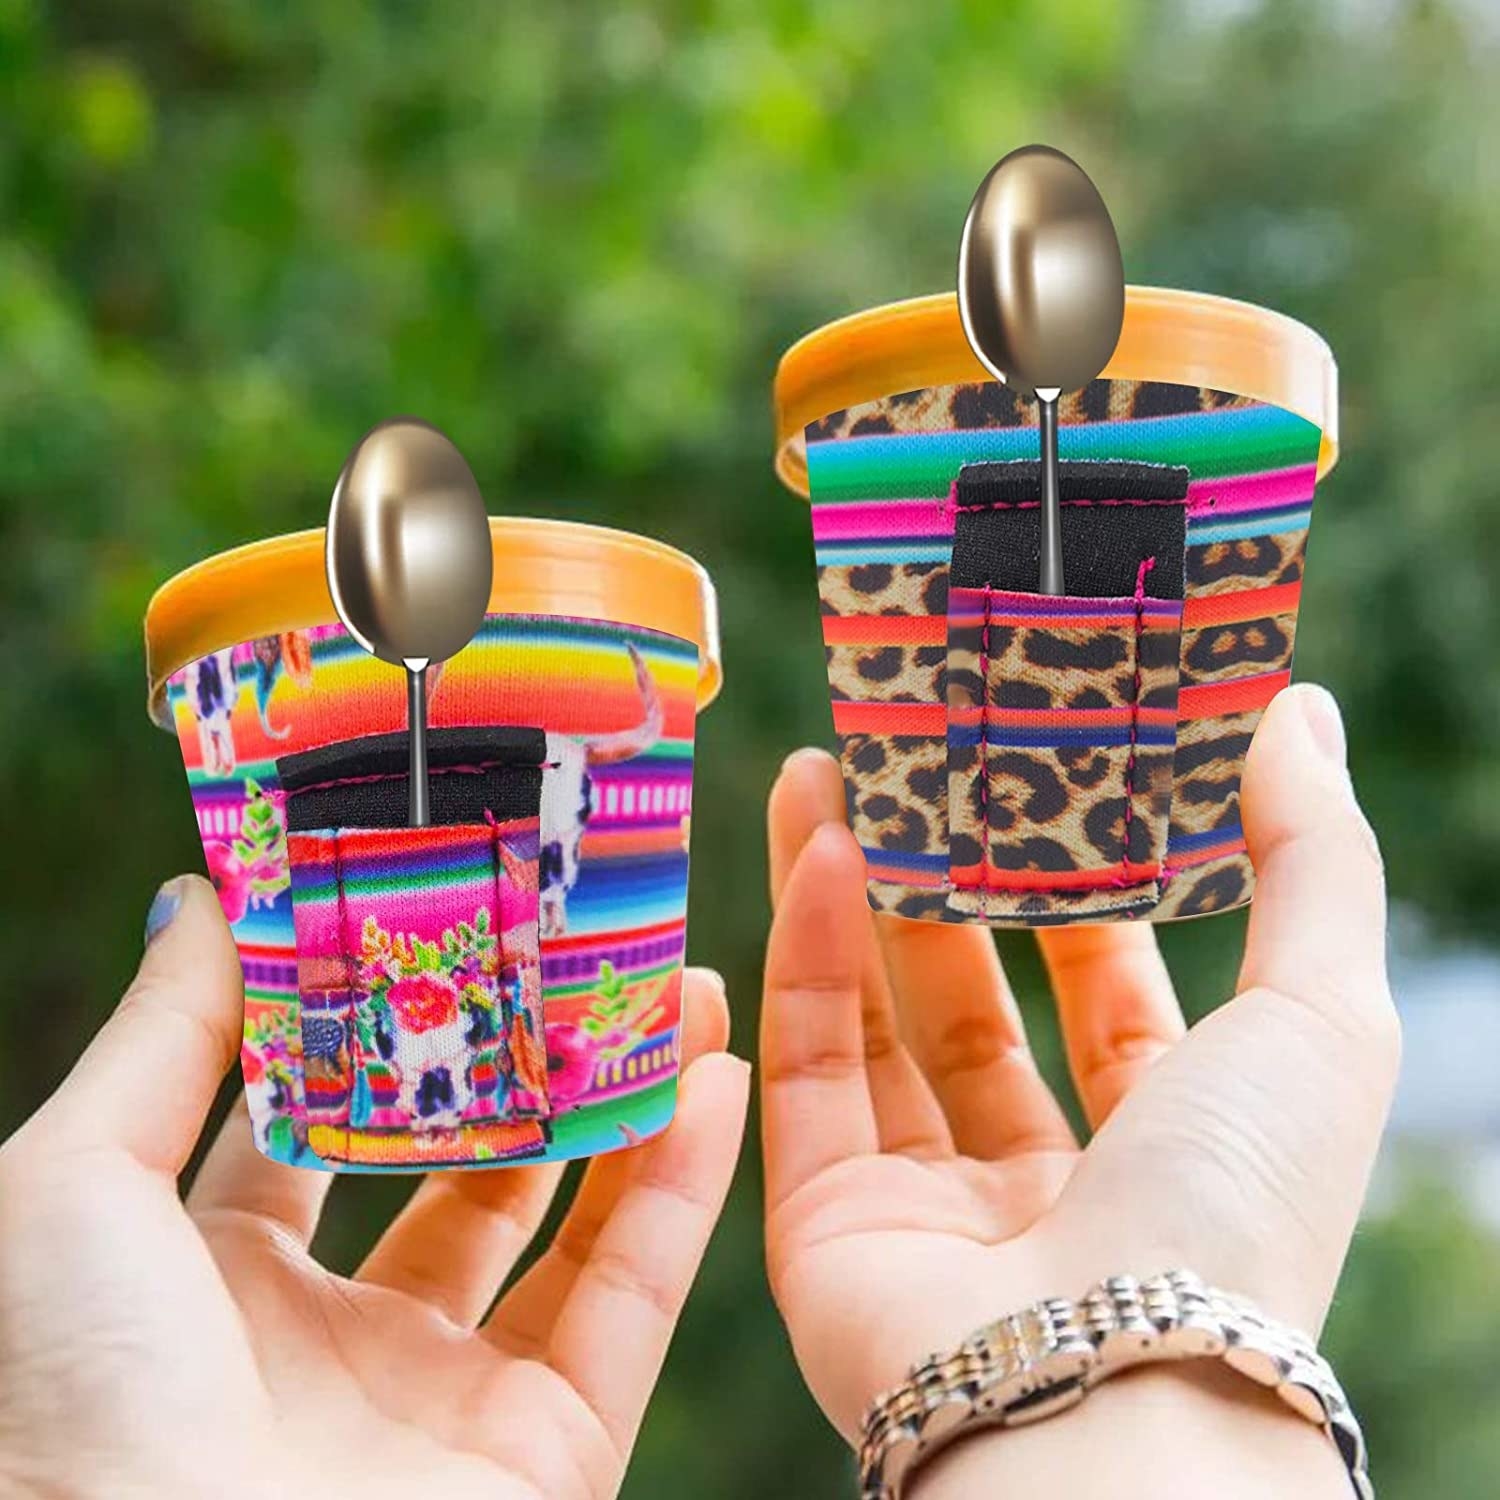 A pair of hands holding two small tubs of ice cream dressed in the neoprene cozies